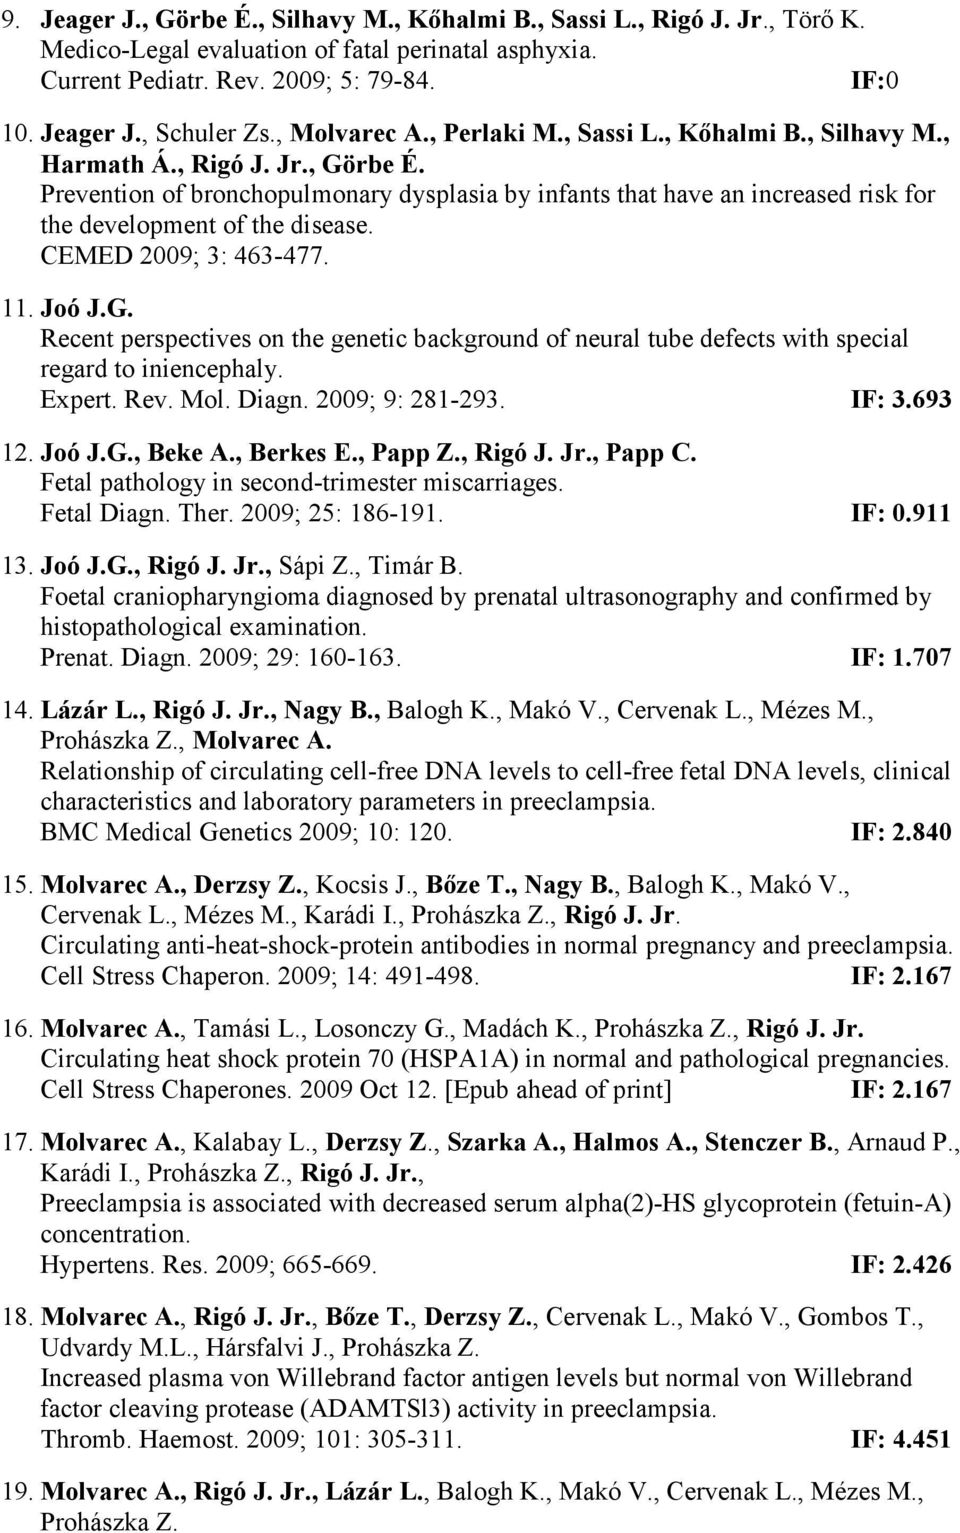 Prevention of bronchopulmonary dysplasia by infants that have an increased risk for the development of the disease. CEMED 2009; 3: 463-477. 11. Joó J.G.